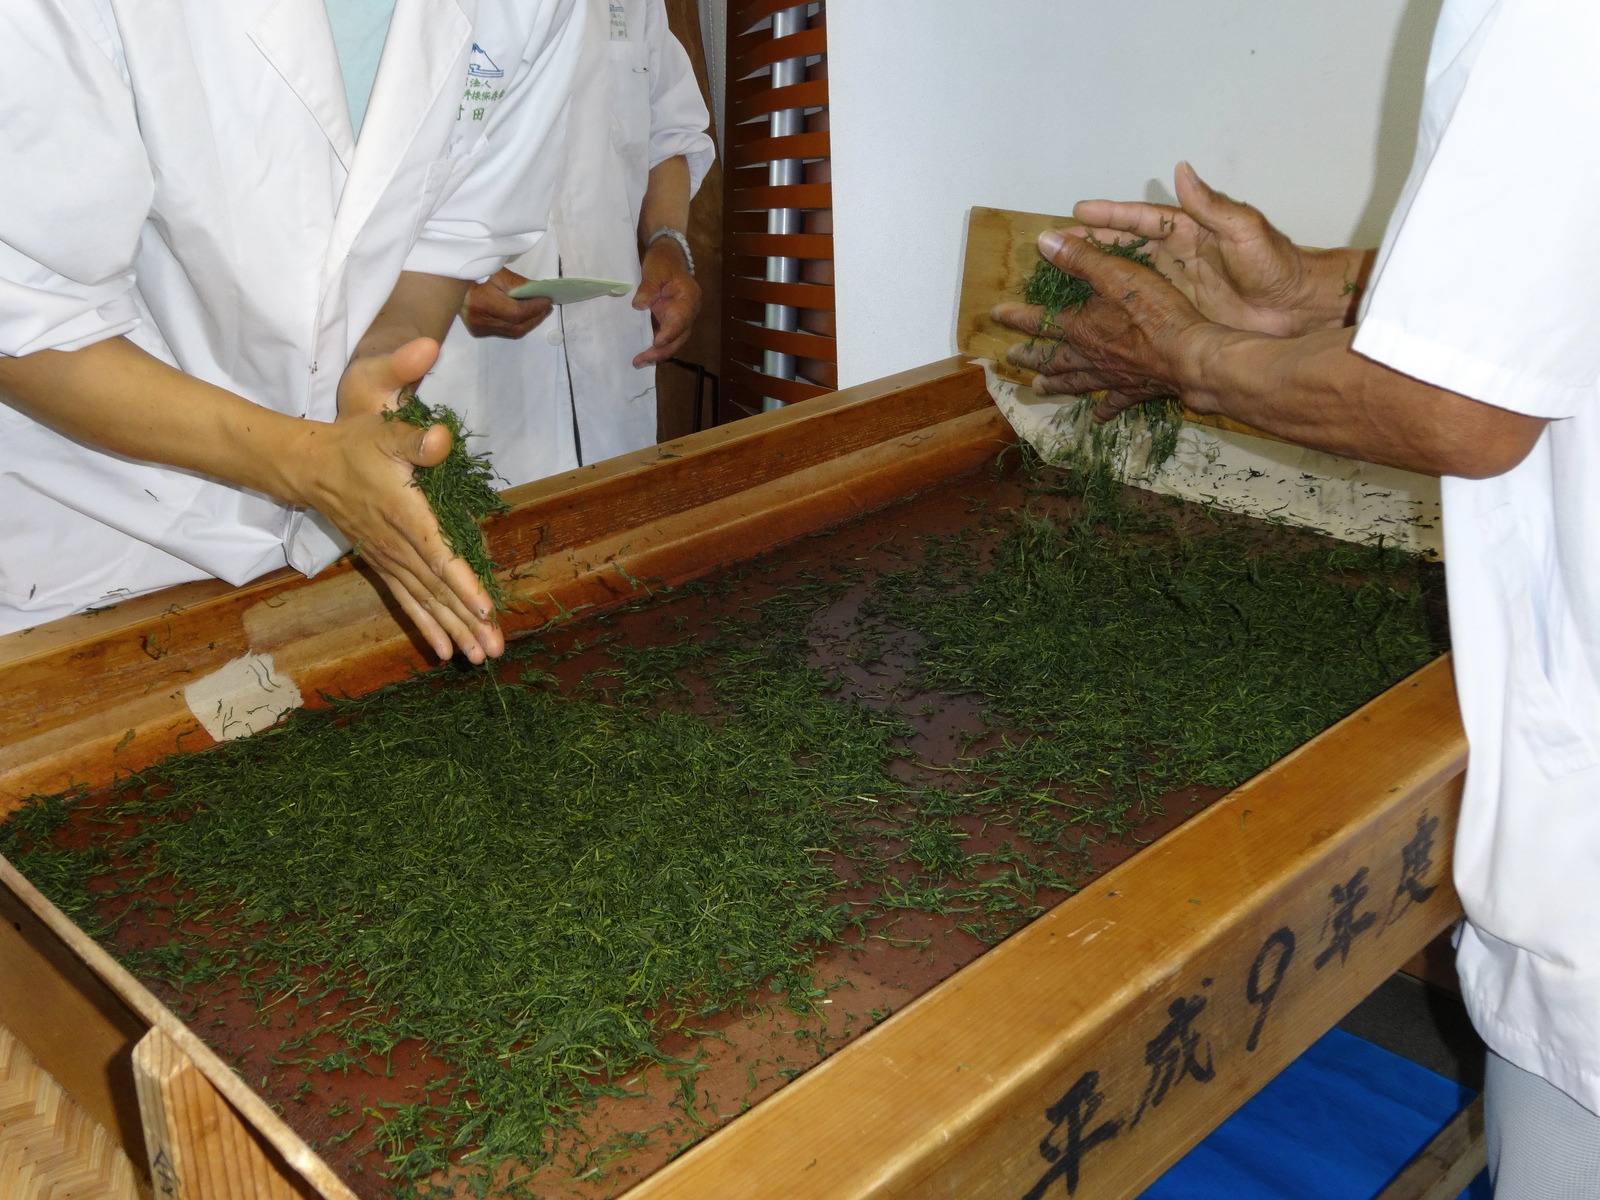 Hand-rolling-green-tea-after-steaming